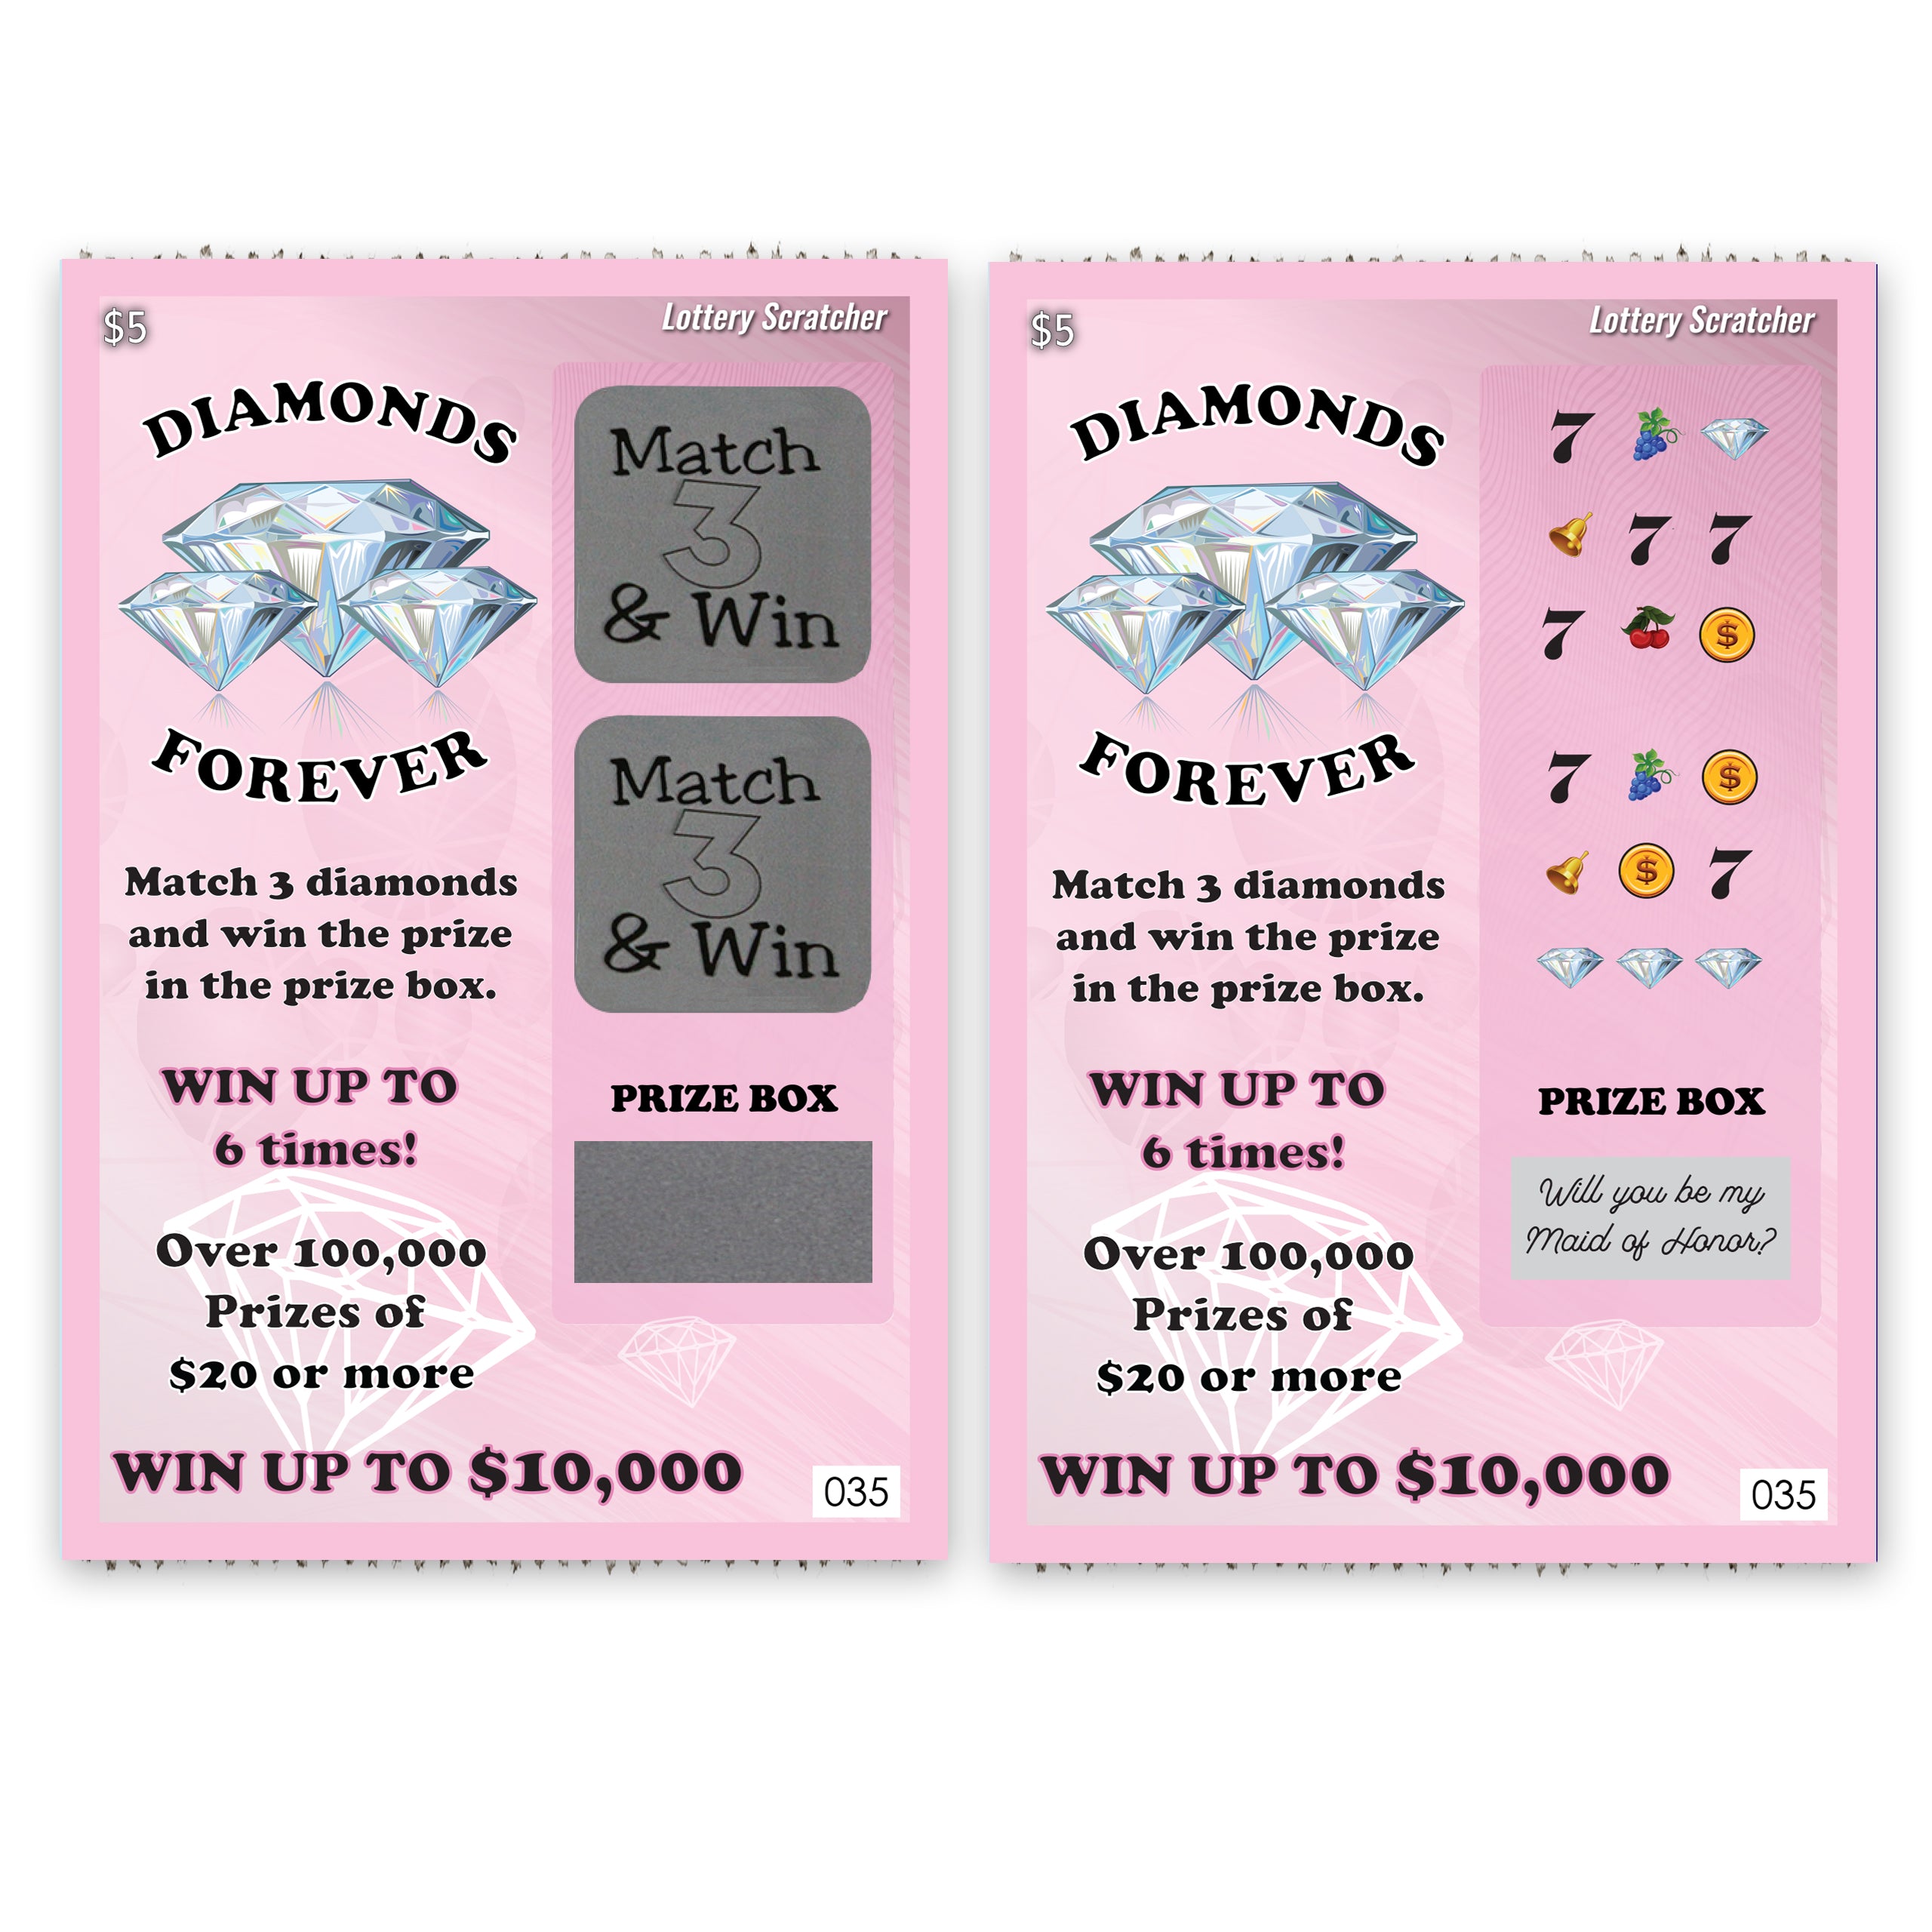 Will You Be My Maid of Honor? Lotto Replica Scratch Off Card 4" x 6" - Pink